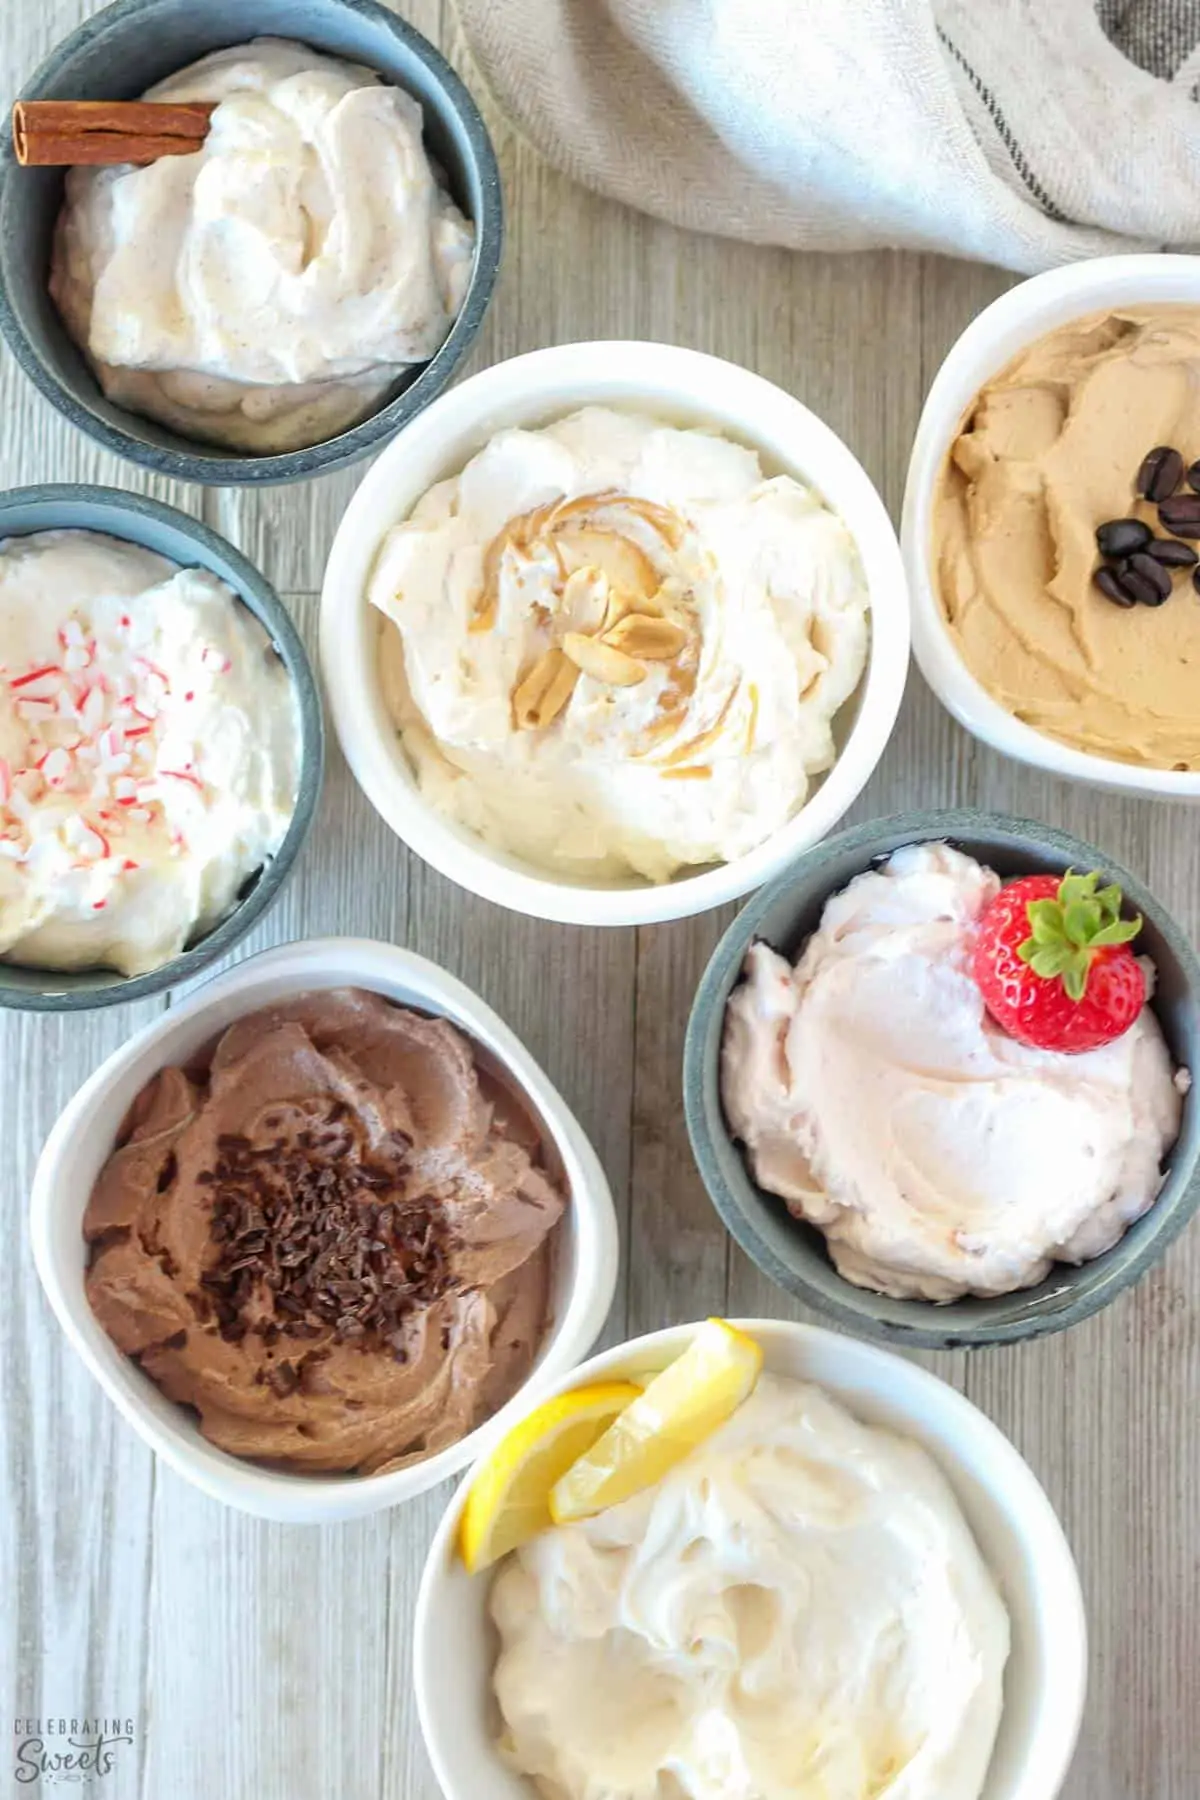 Seven bowls of flavored whipped cream on a wooden board